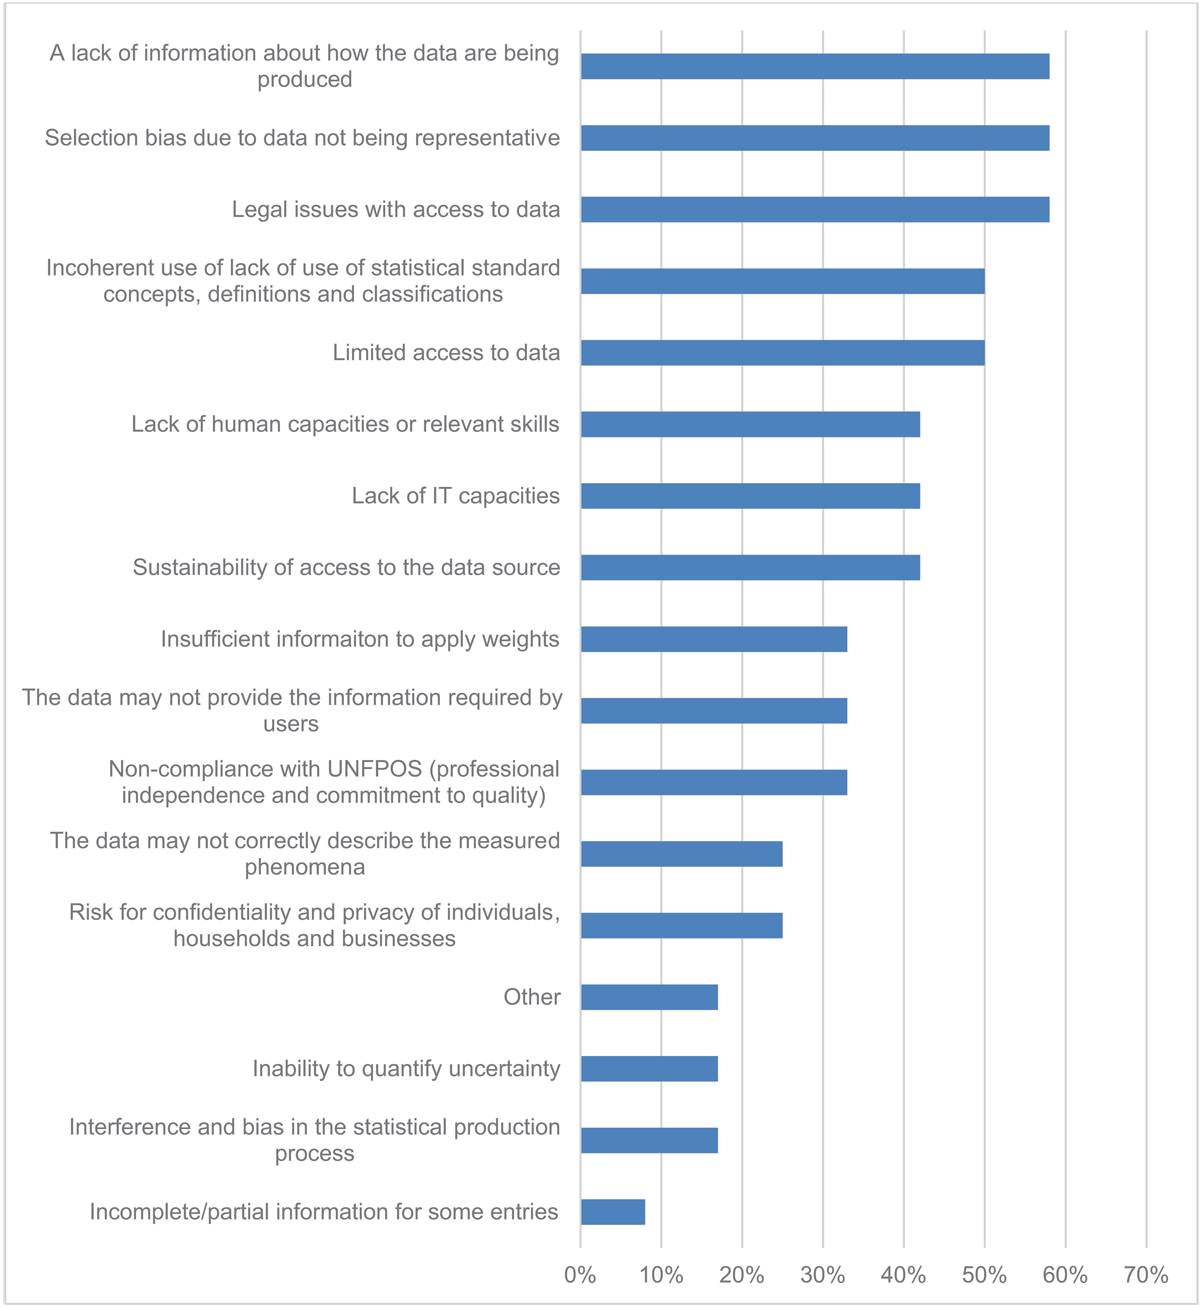 Barchart with challenges encountered by respondents’ organizations in CSD projects